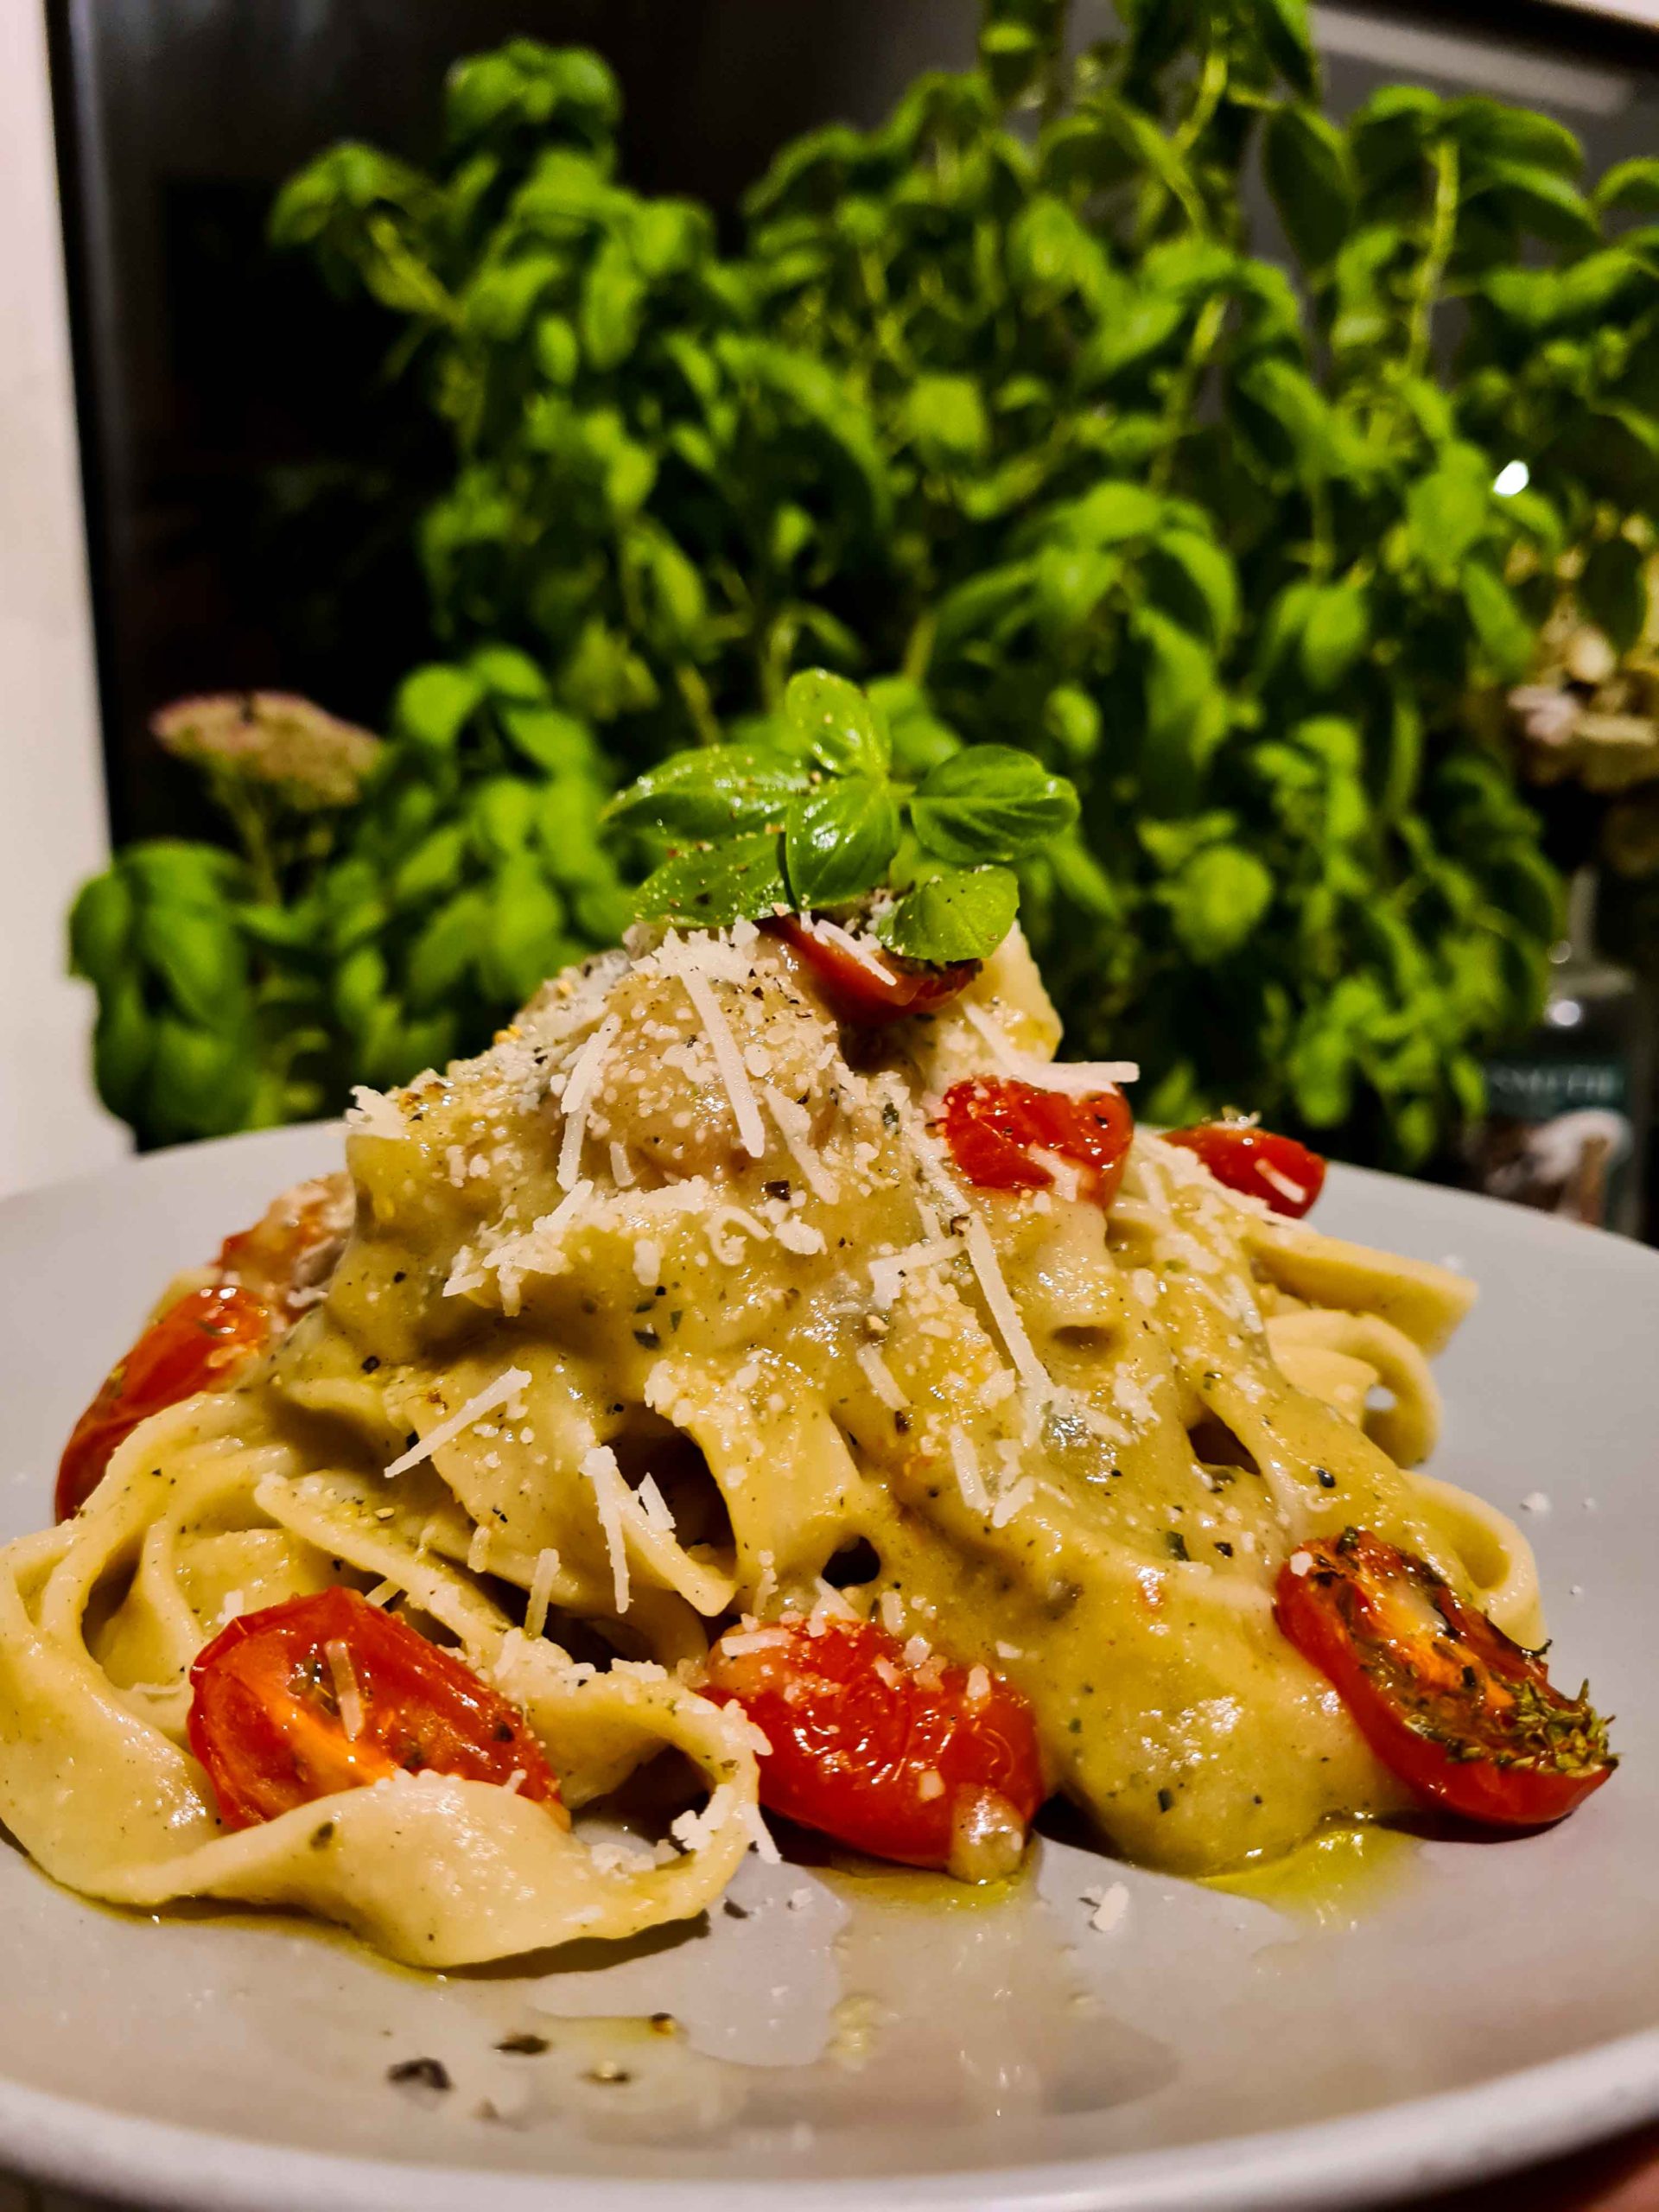 The Best Smoky Aubergine Rebecca Confit TG | With Datterini Tomatoes Pasta